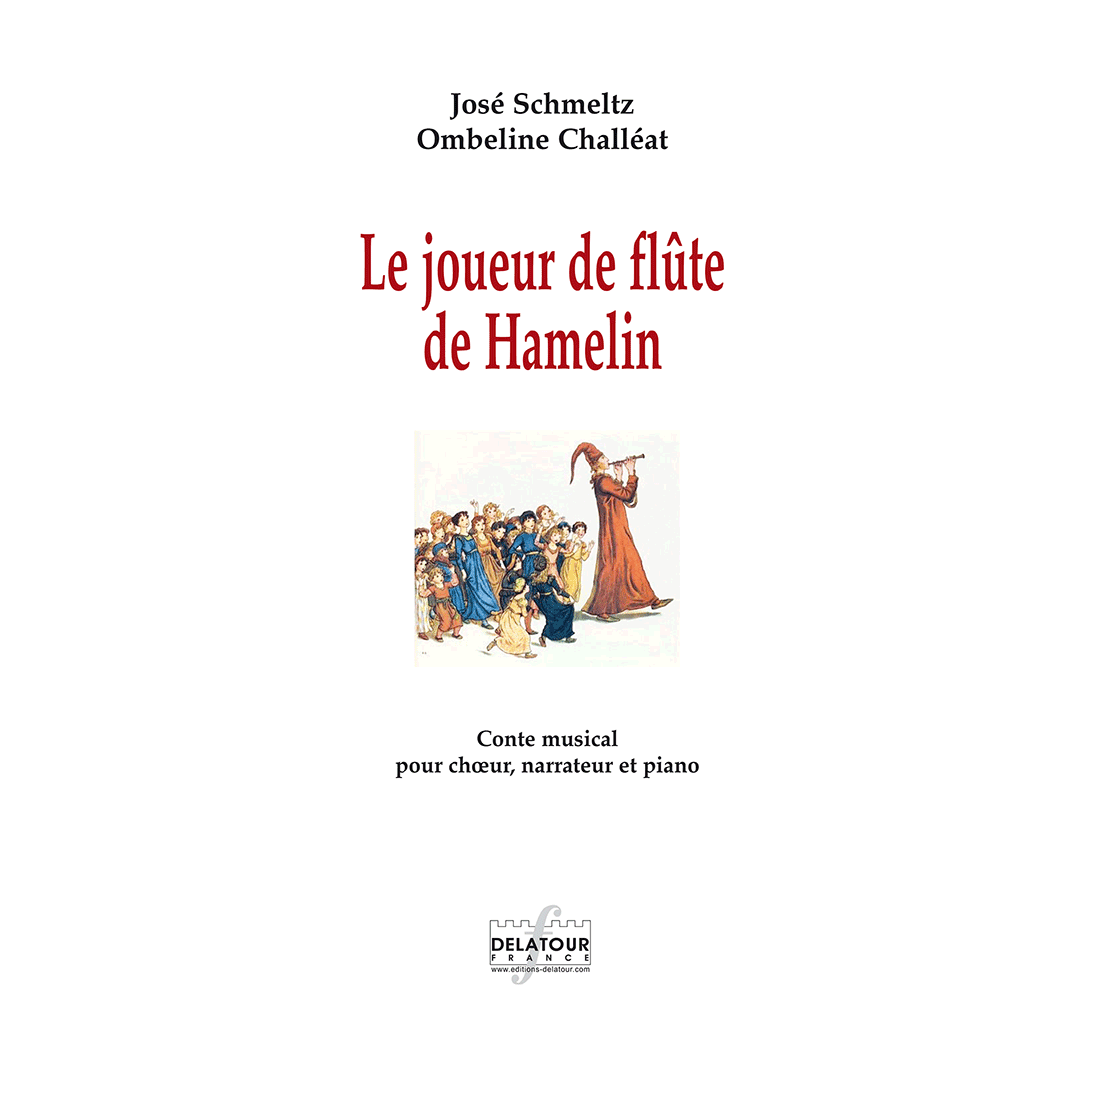 Hamelin's Flute player - Musical tale for choir, narrator and piano